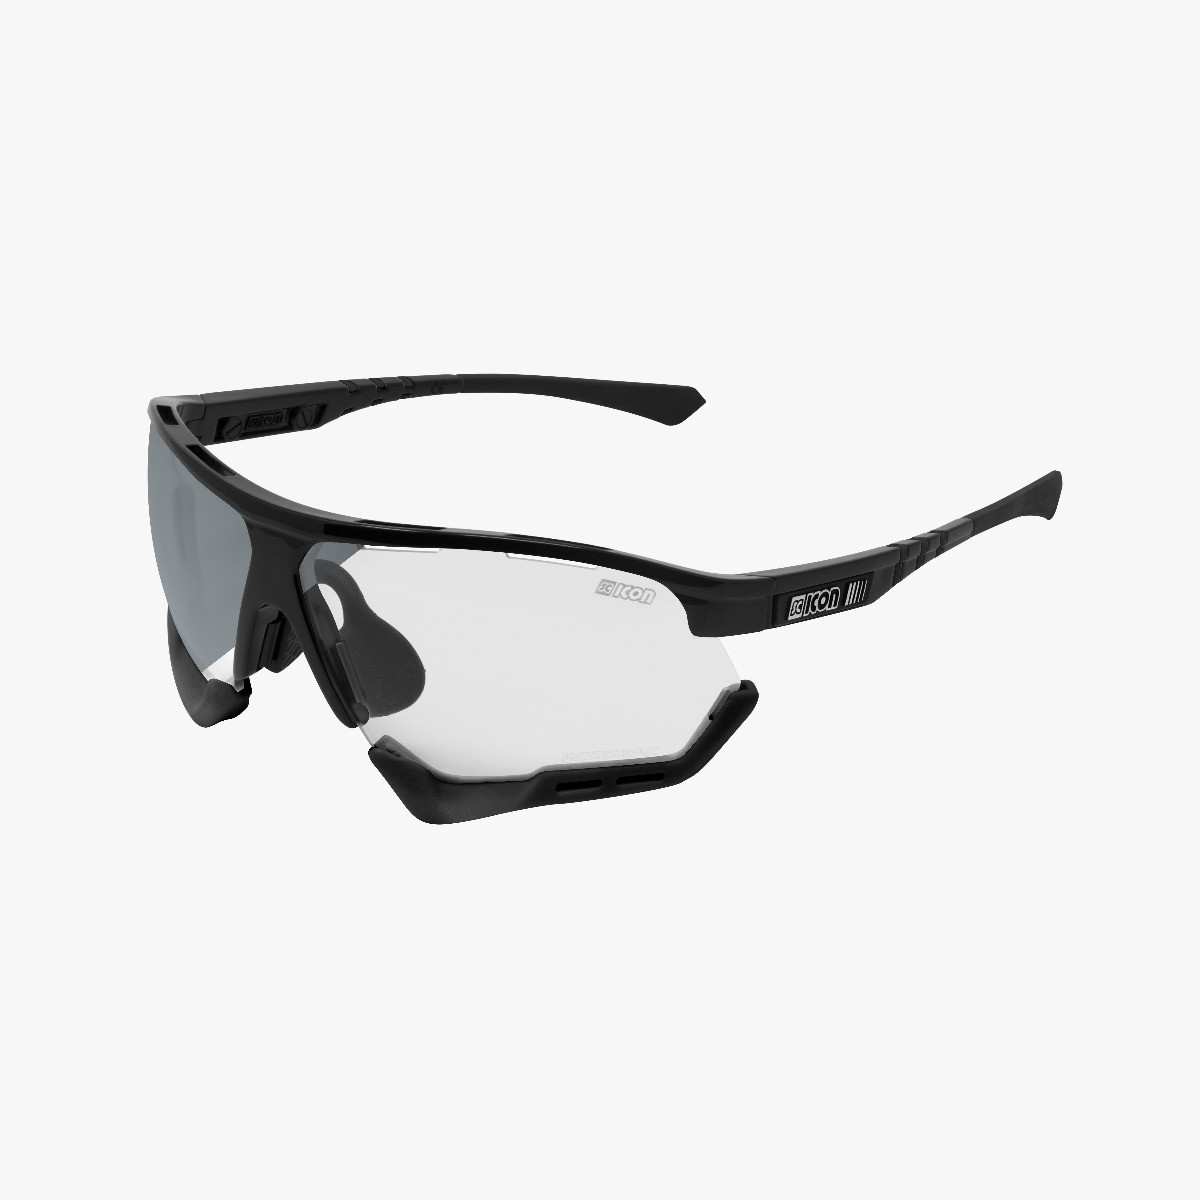 Scicon Sports | Aerocomfort Sport Cycling Performance Sunglasses - Black Gloss / Photocromatic Silver - EY15170201
